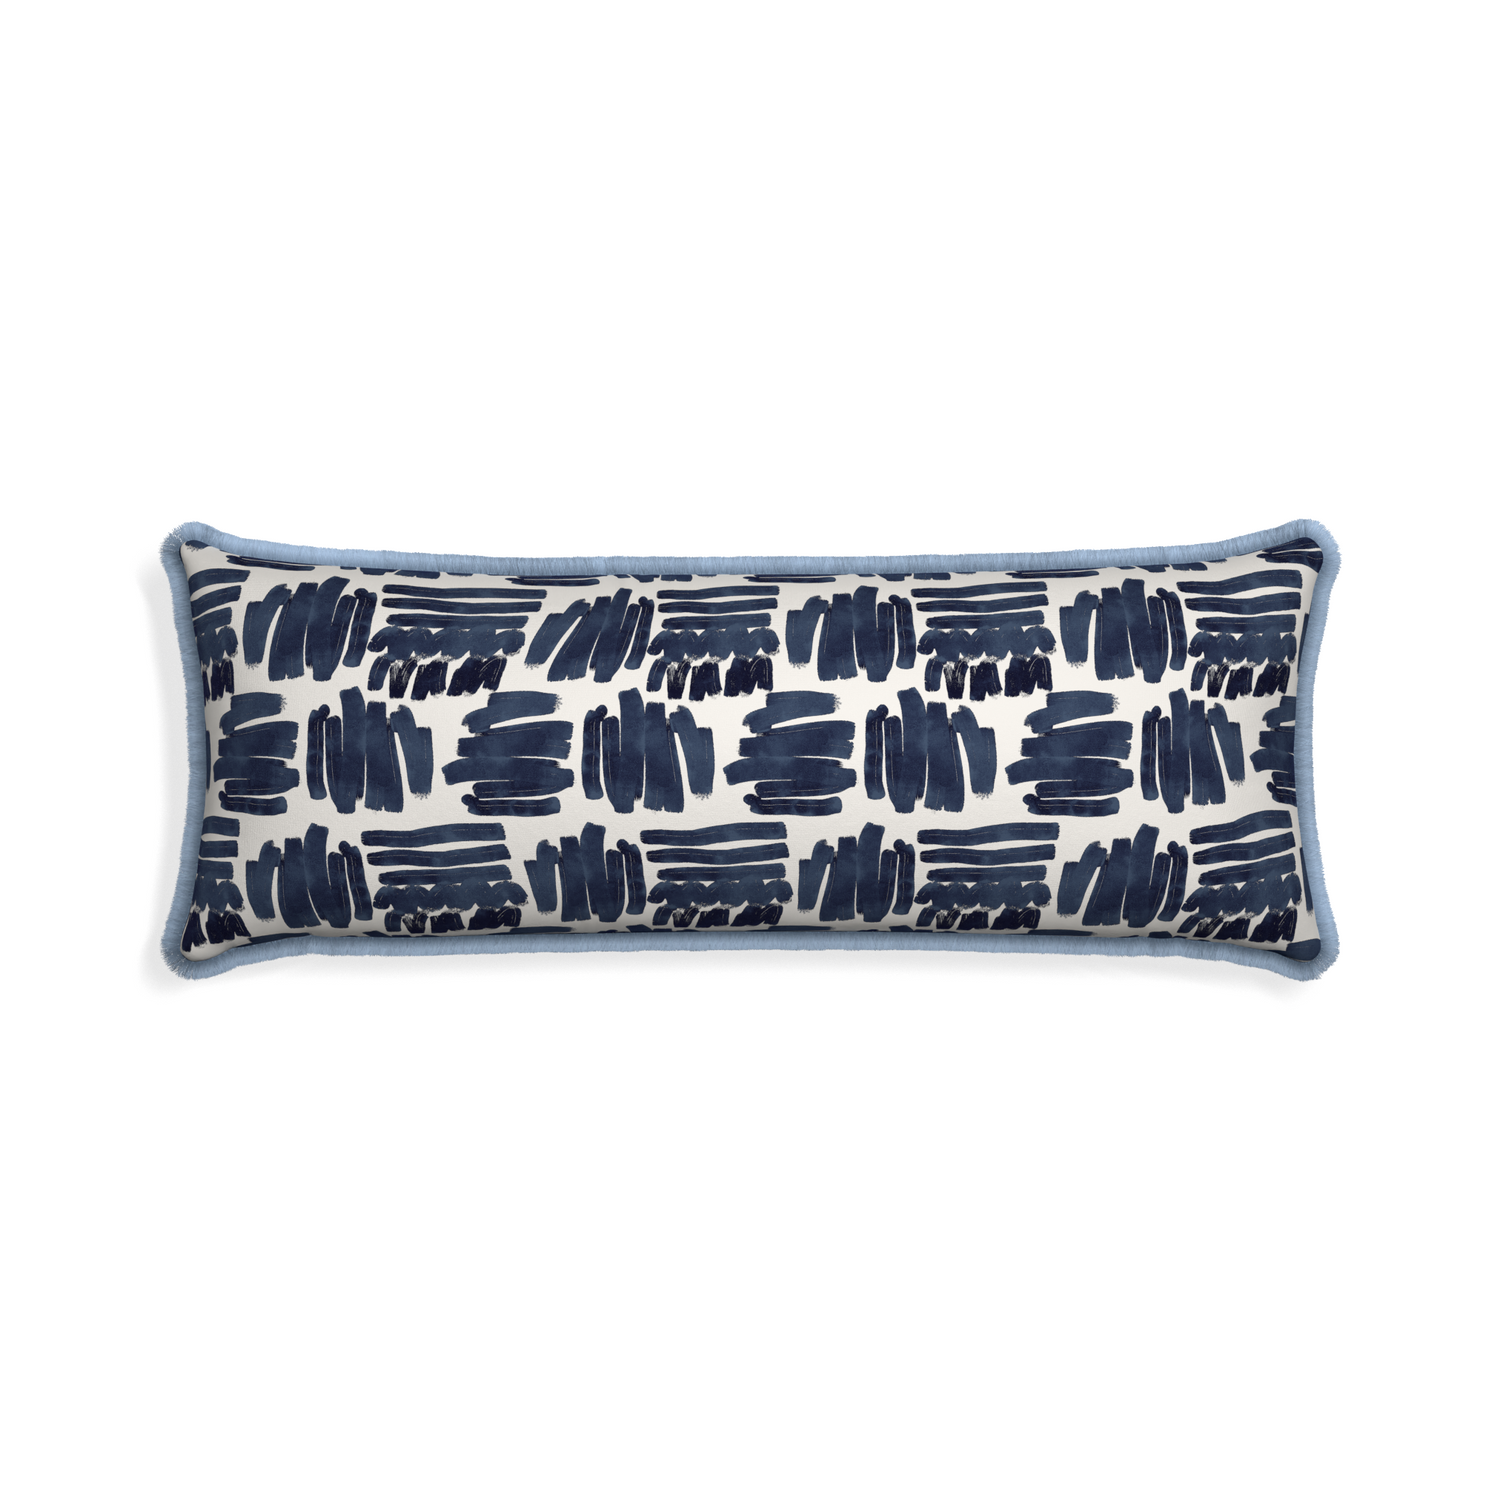 Xl-lumbar warby custom pillow with sky fringe on white background